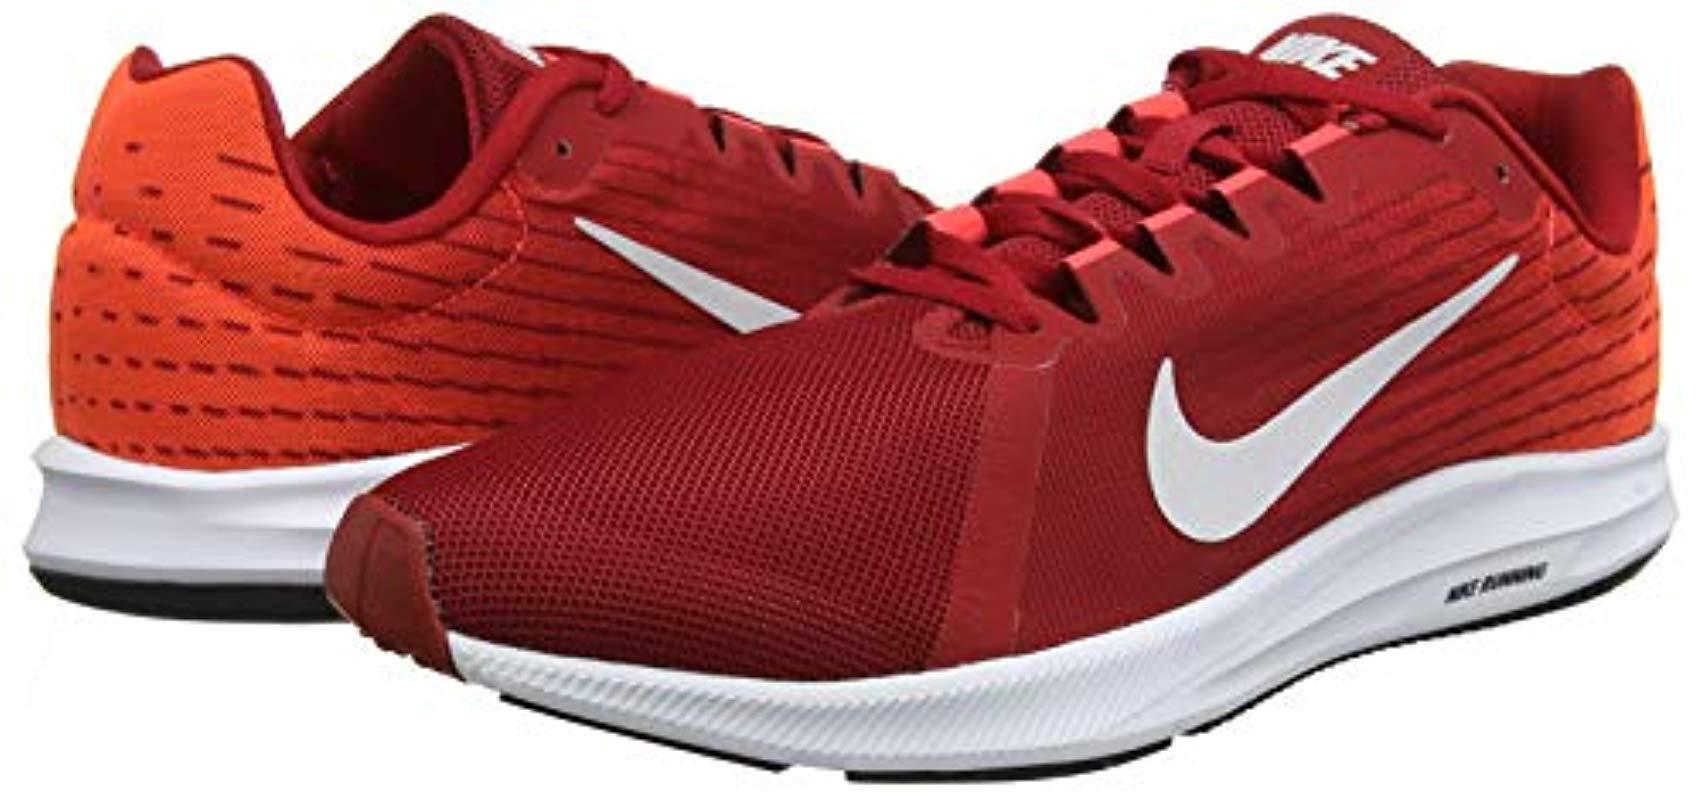 Nike Downshifter 8 Running Shoe in for | Lyst